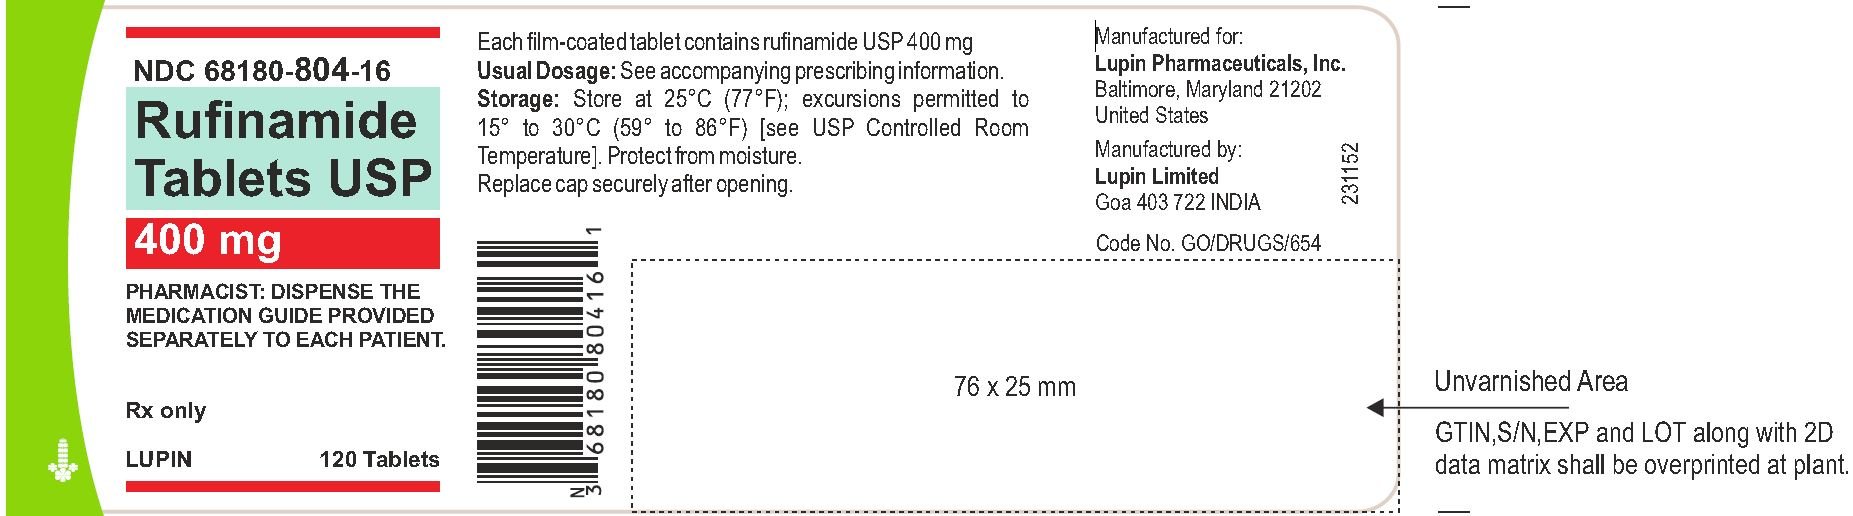 NDC 68180-804-16
Container Label of 120 Tablets